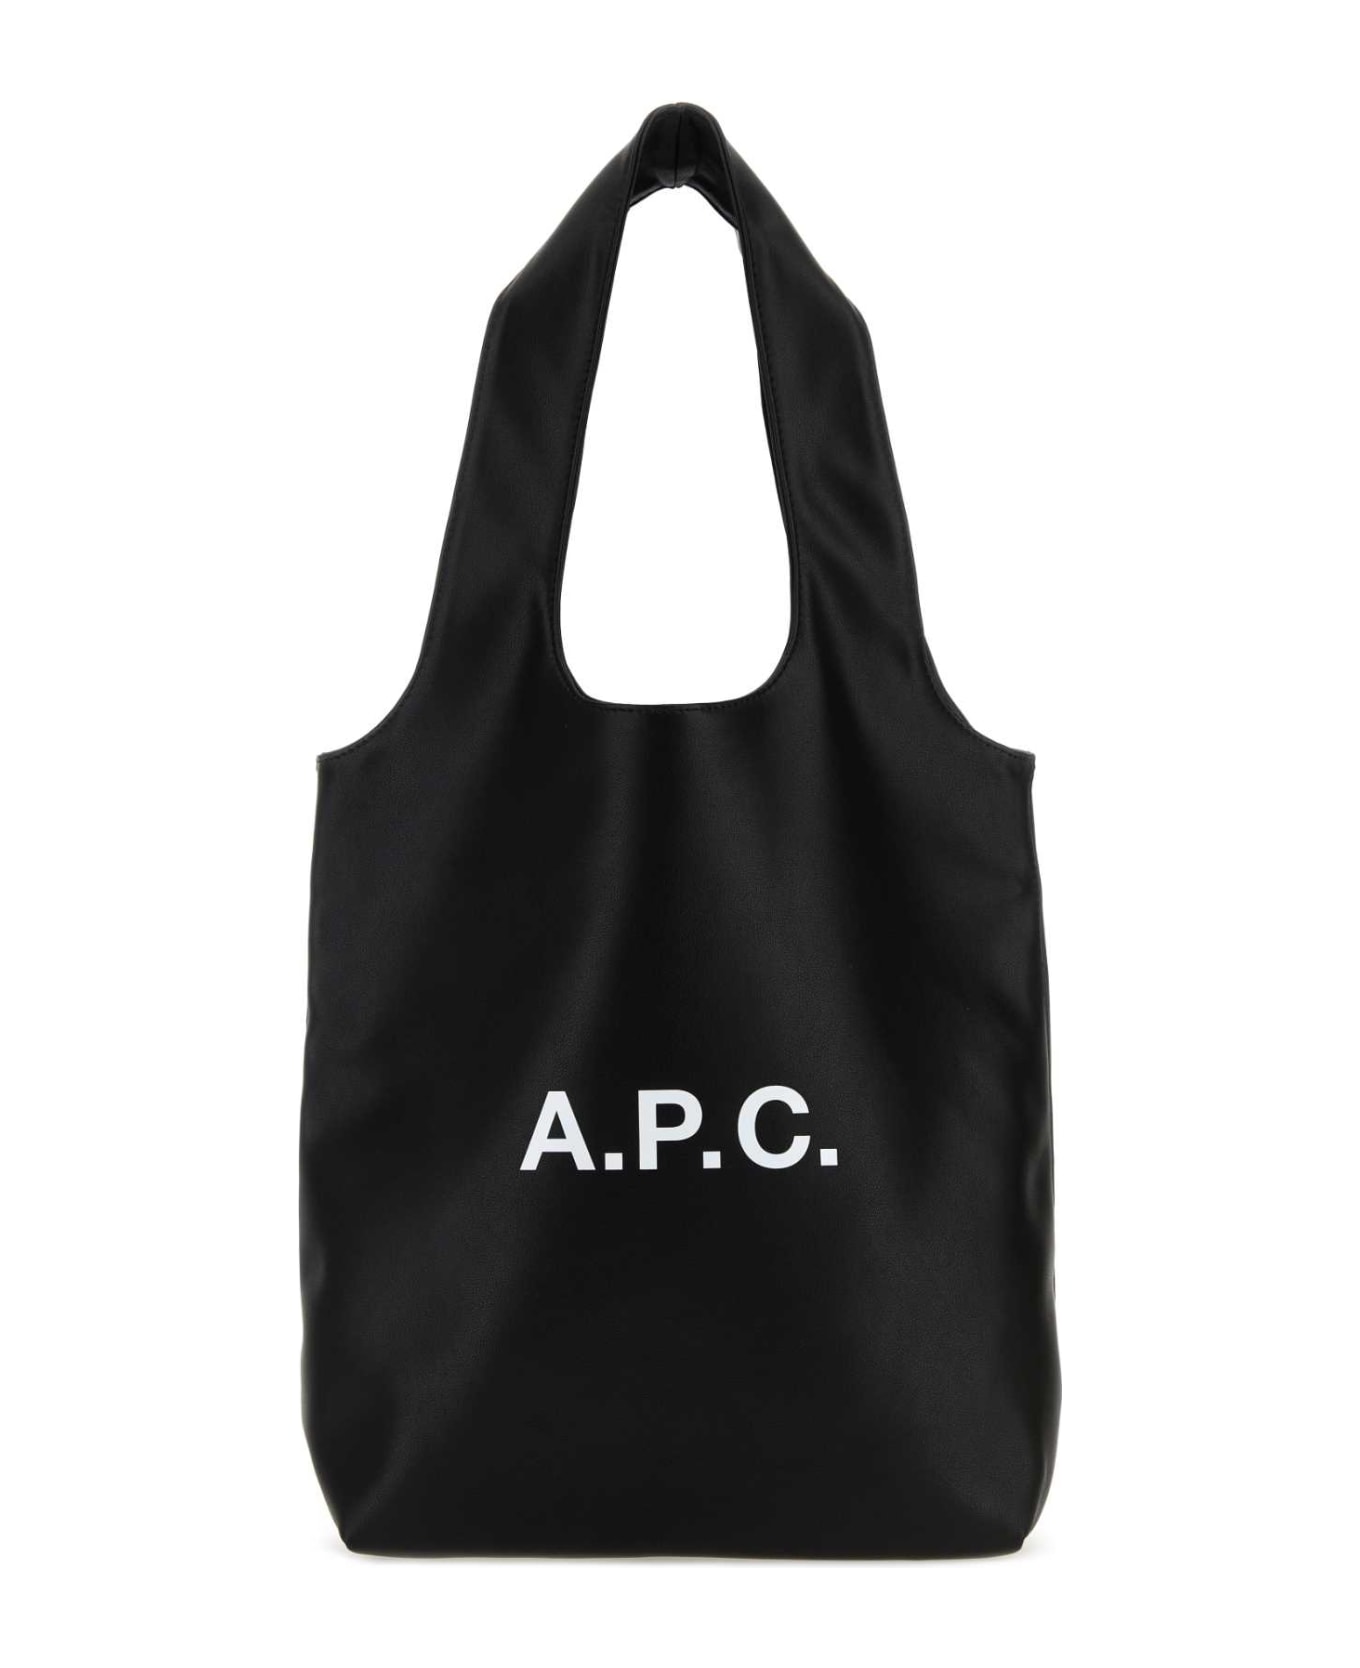 A.P.C. Black Synthetic Leather Shopping Bag - LZZBLACK